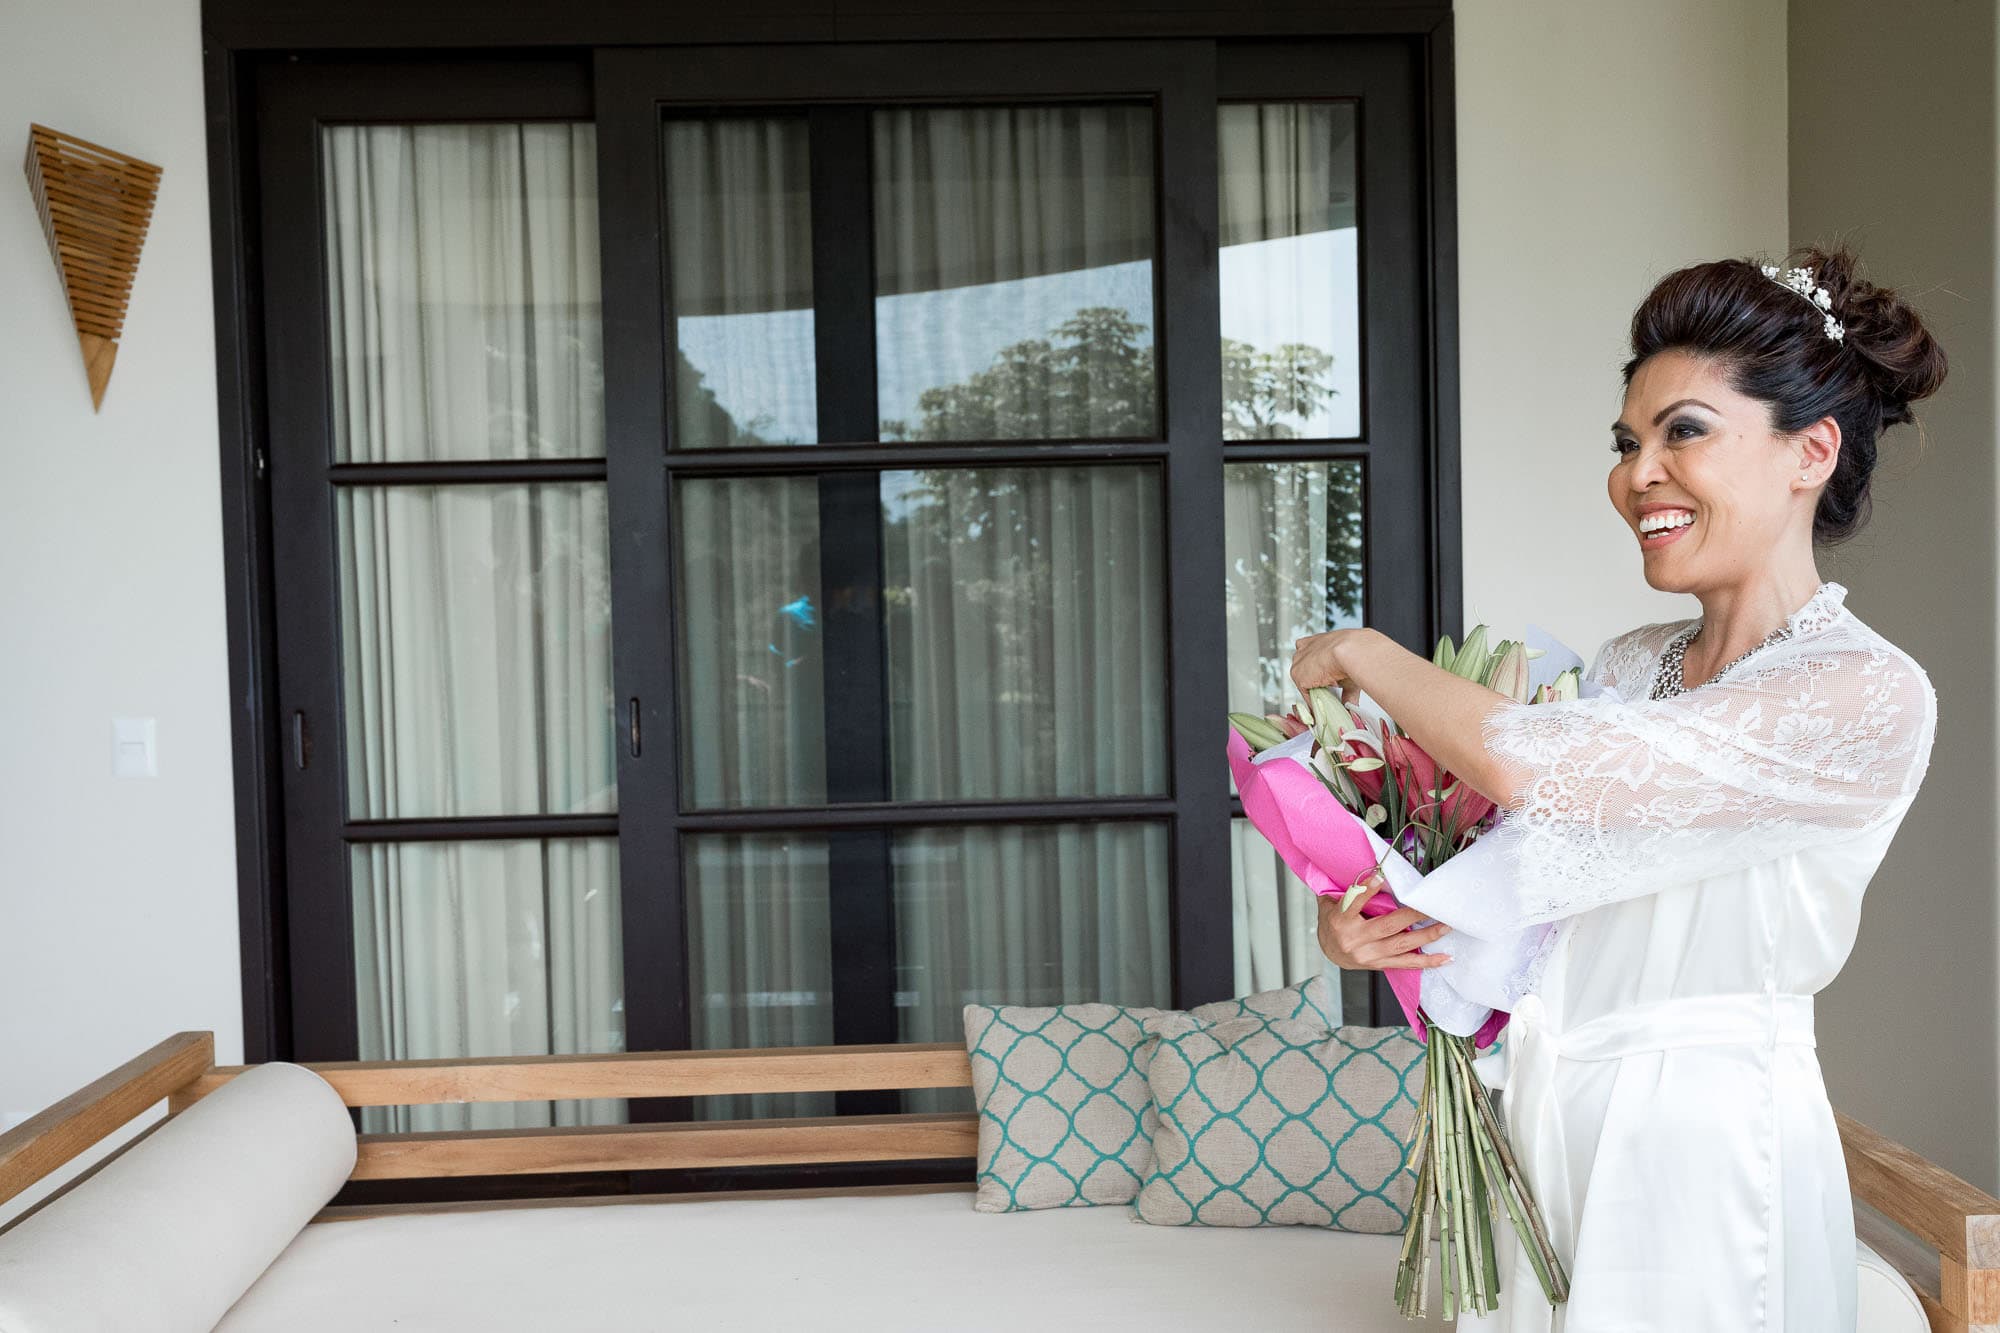 The bride with her gift bouquet